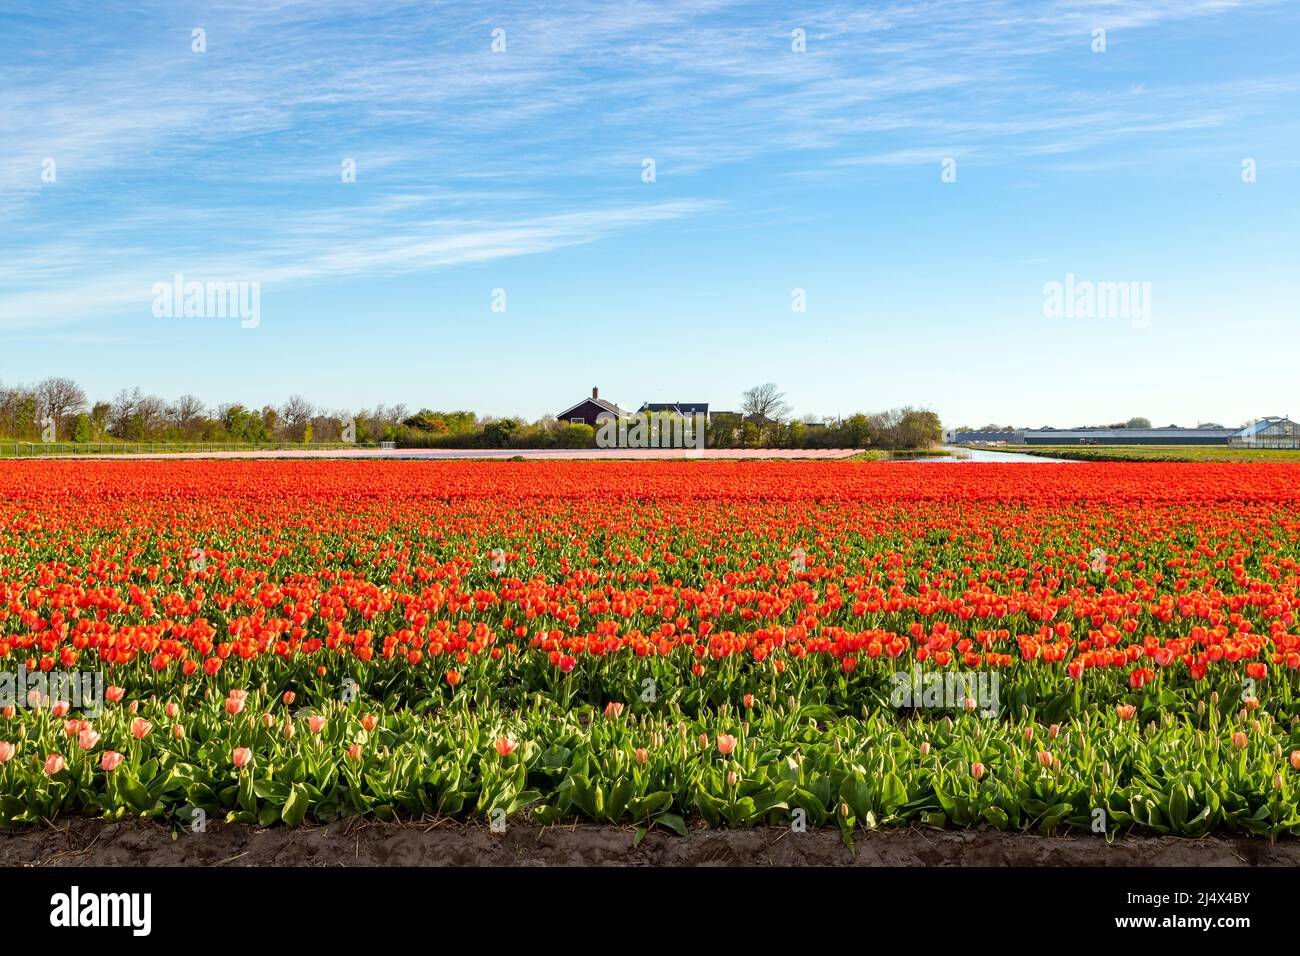 Flowering tulips in rural landscape, Noordwijkerhout, South Holland, The Netherlands. Typically Dutch landscape beauty in spring. Stock Photo